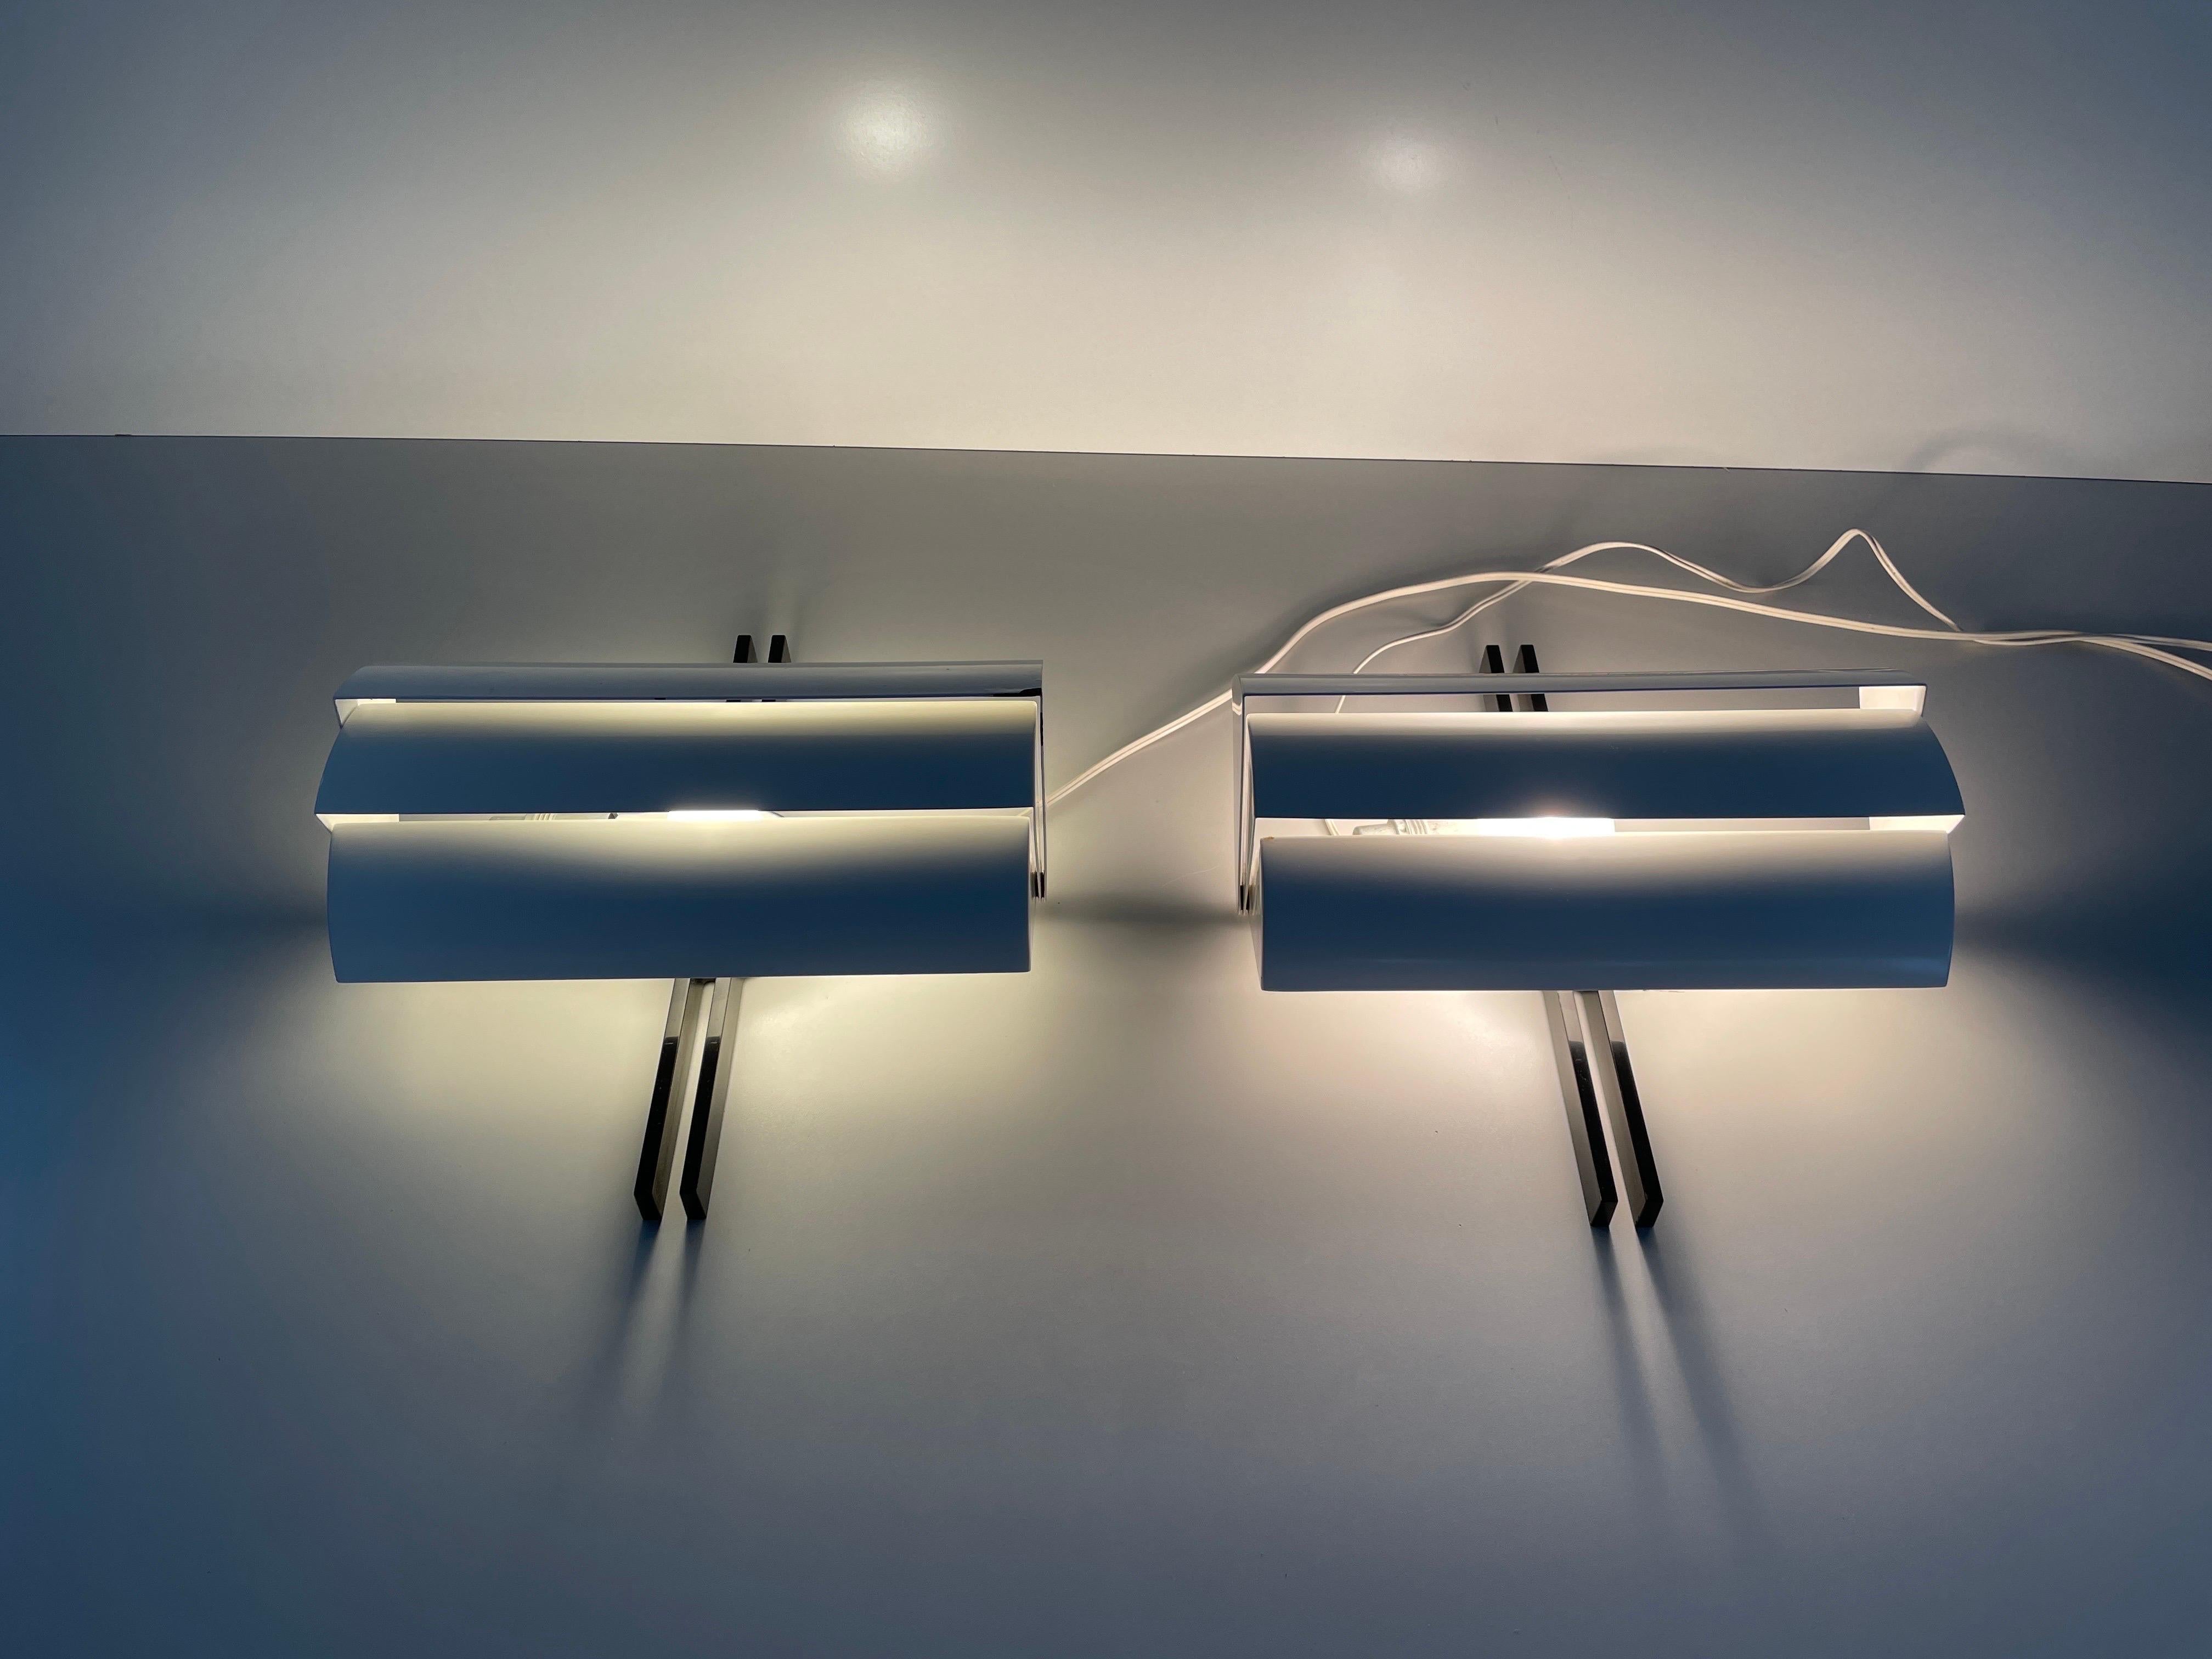 Black and White Metal Pair of Sconces by E. Gismondi for Artemide, 1970s, Italy For Sale 5